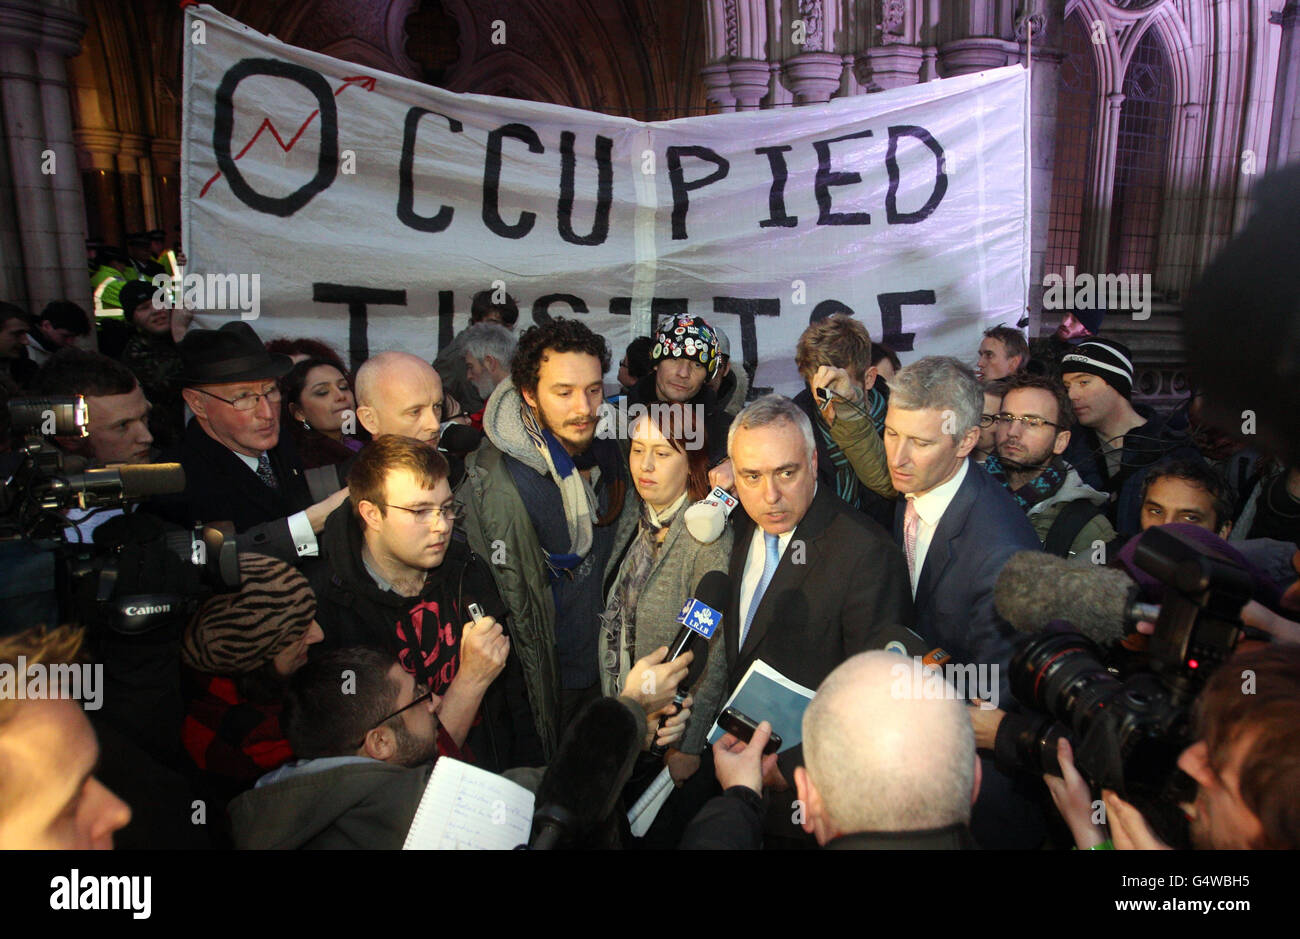 Occupy London protesters, with John Cooper QC, blue tie, and barrister Michael Paget, pink tie, at the High Court following news that the City of London Corporation has won its High Court bid to evict anti-capitalist protesters from outside St Paul's Cathedral. Stock Photo